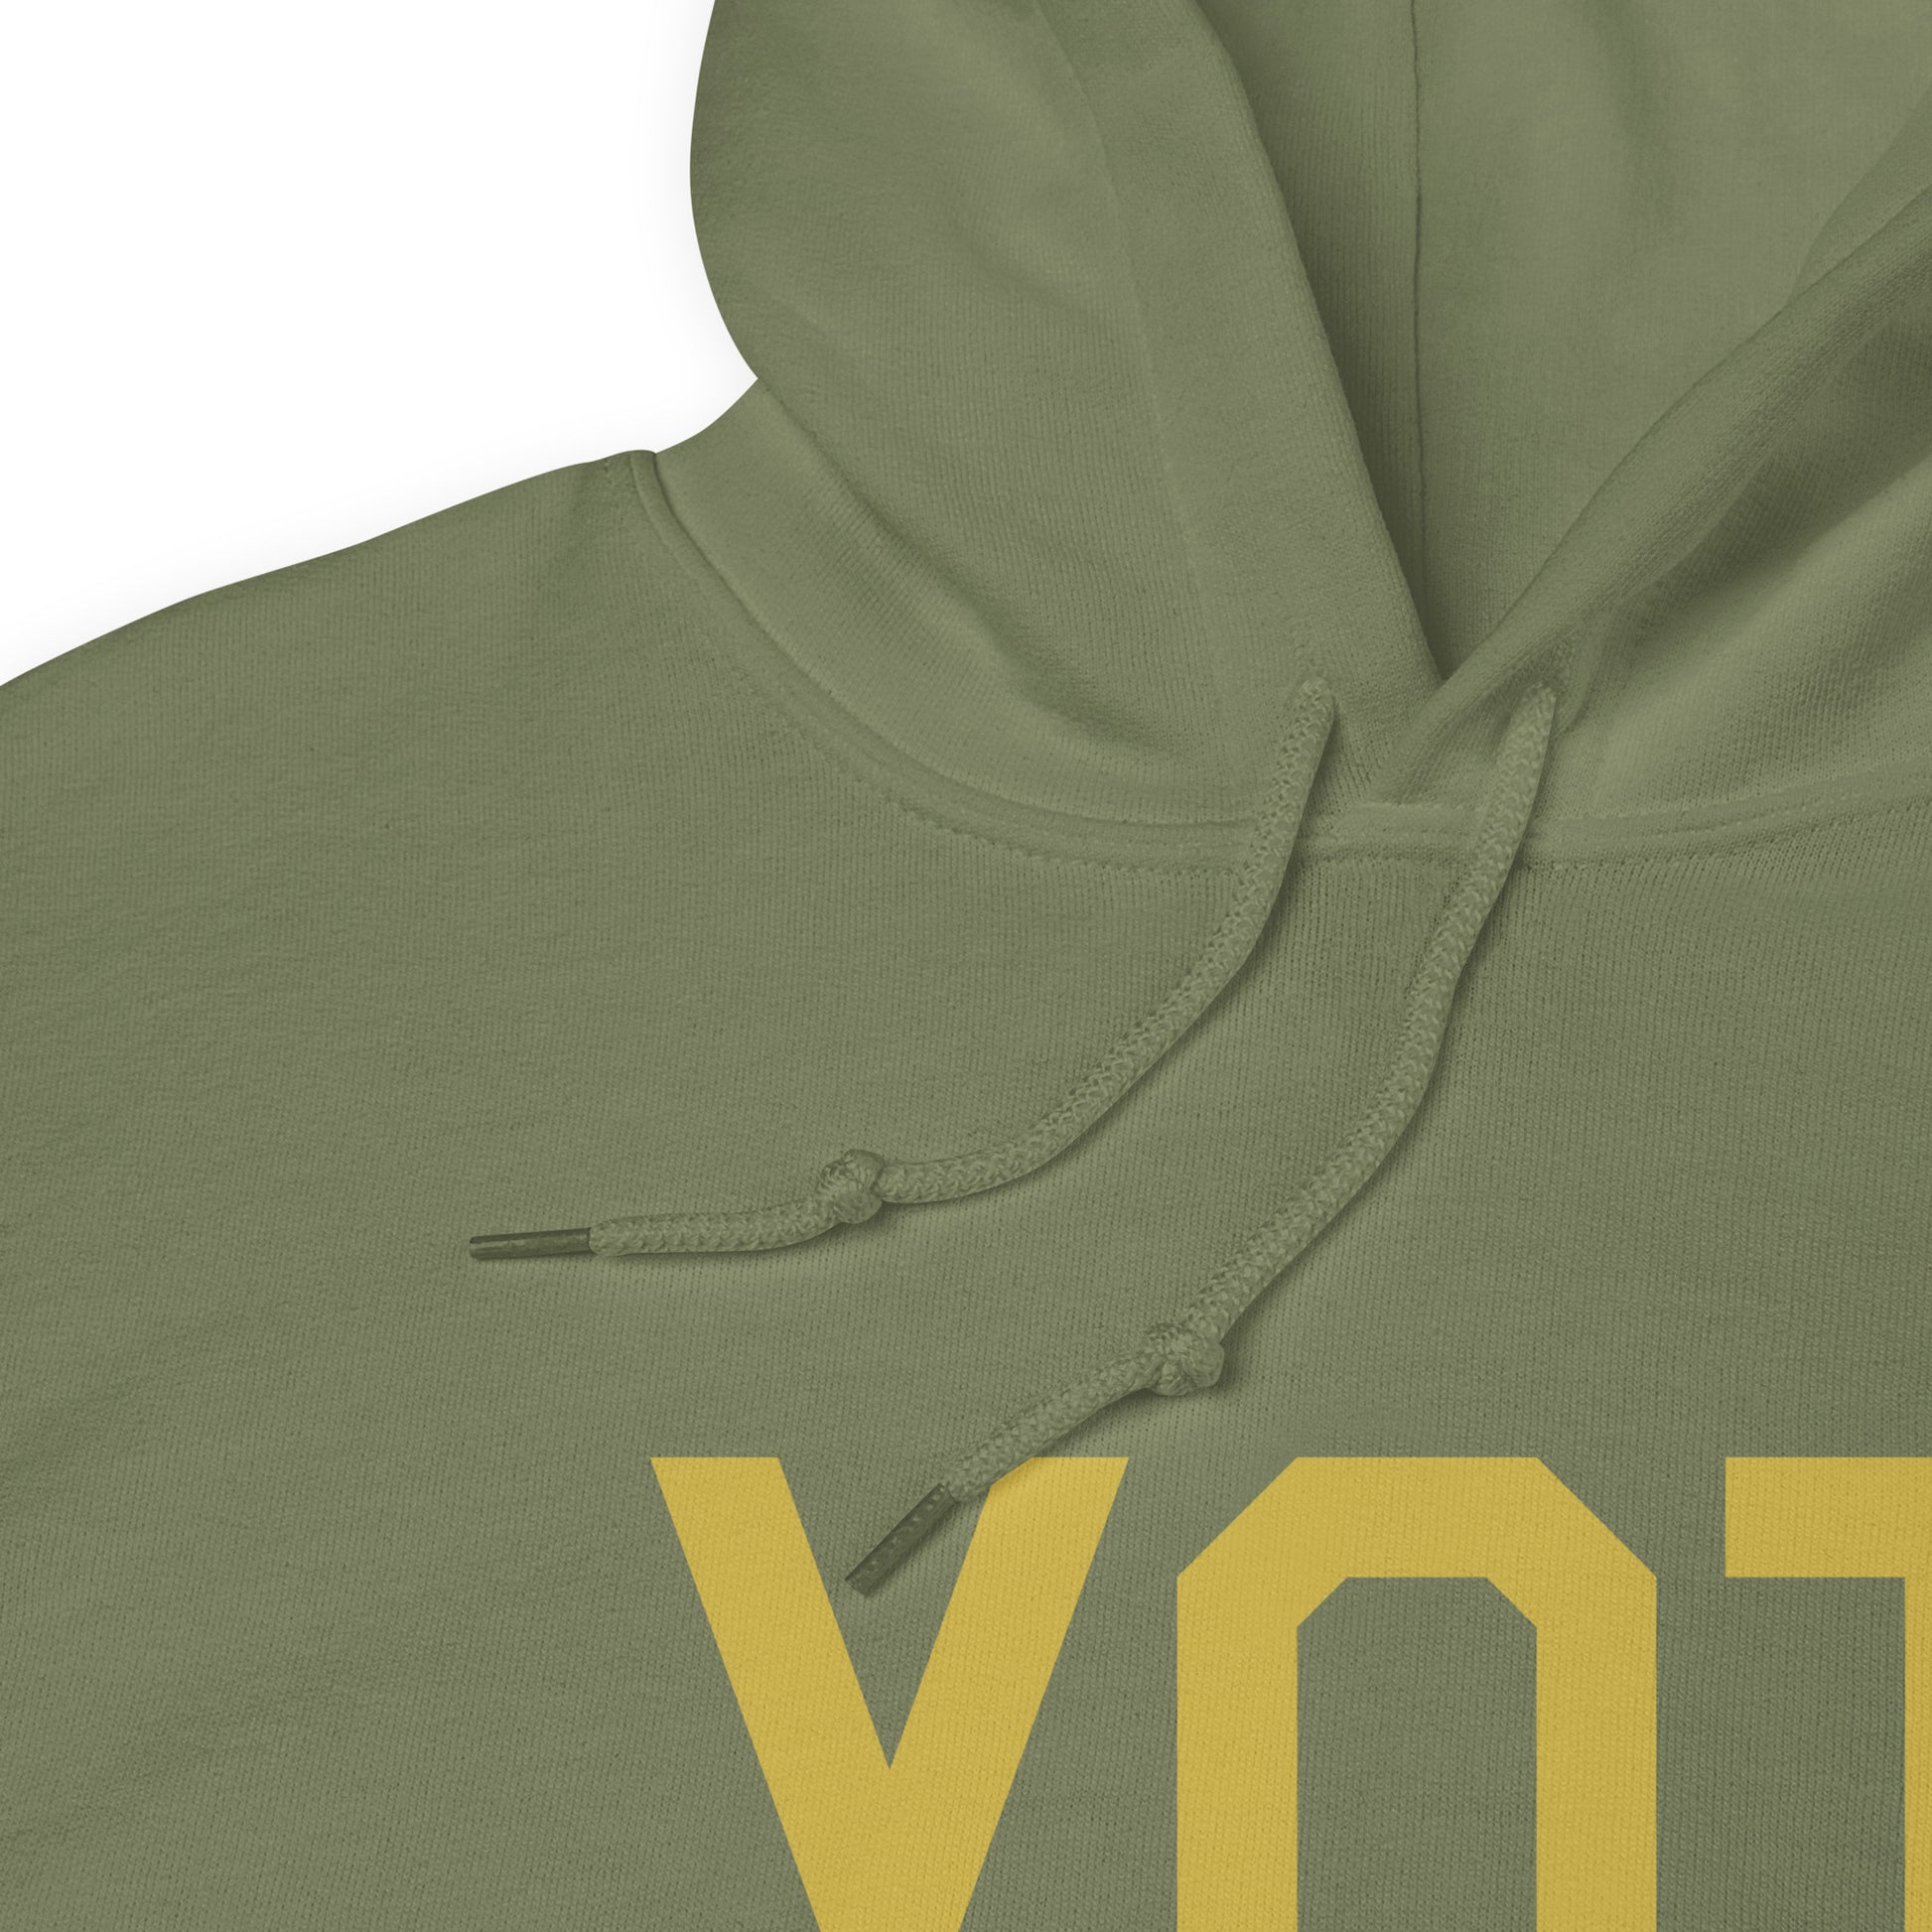 Aviation Gift Unisex Hoodie - Old Gold Graphic • YQT Thunder Bay • YHM Designs - Image 08